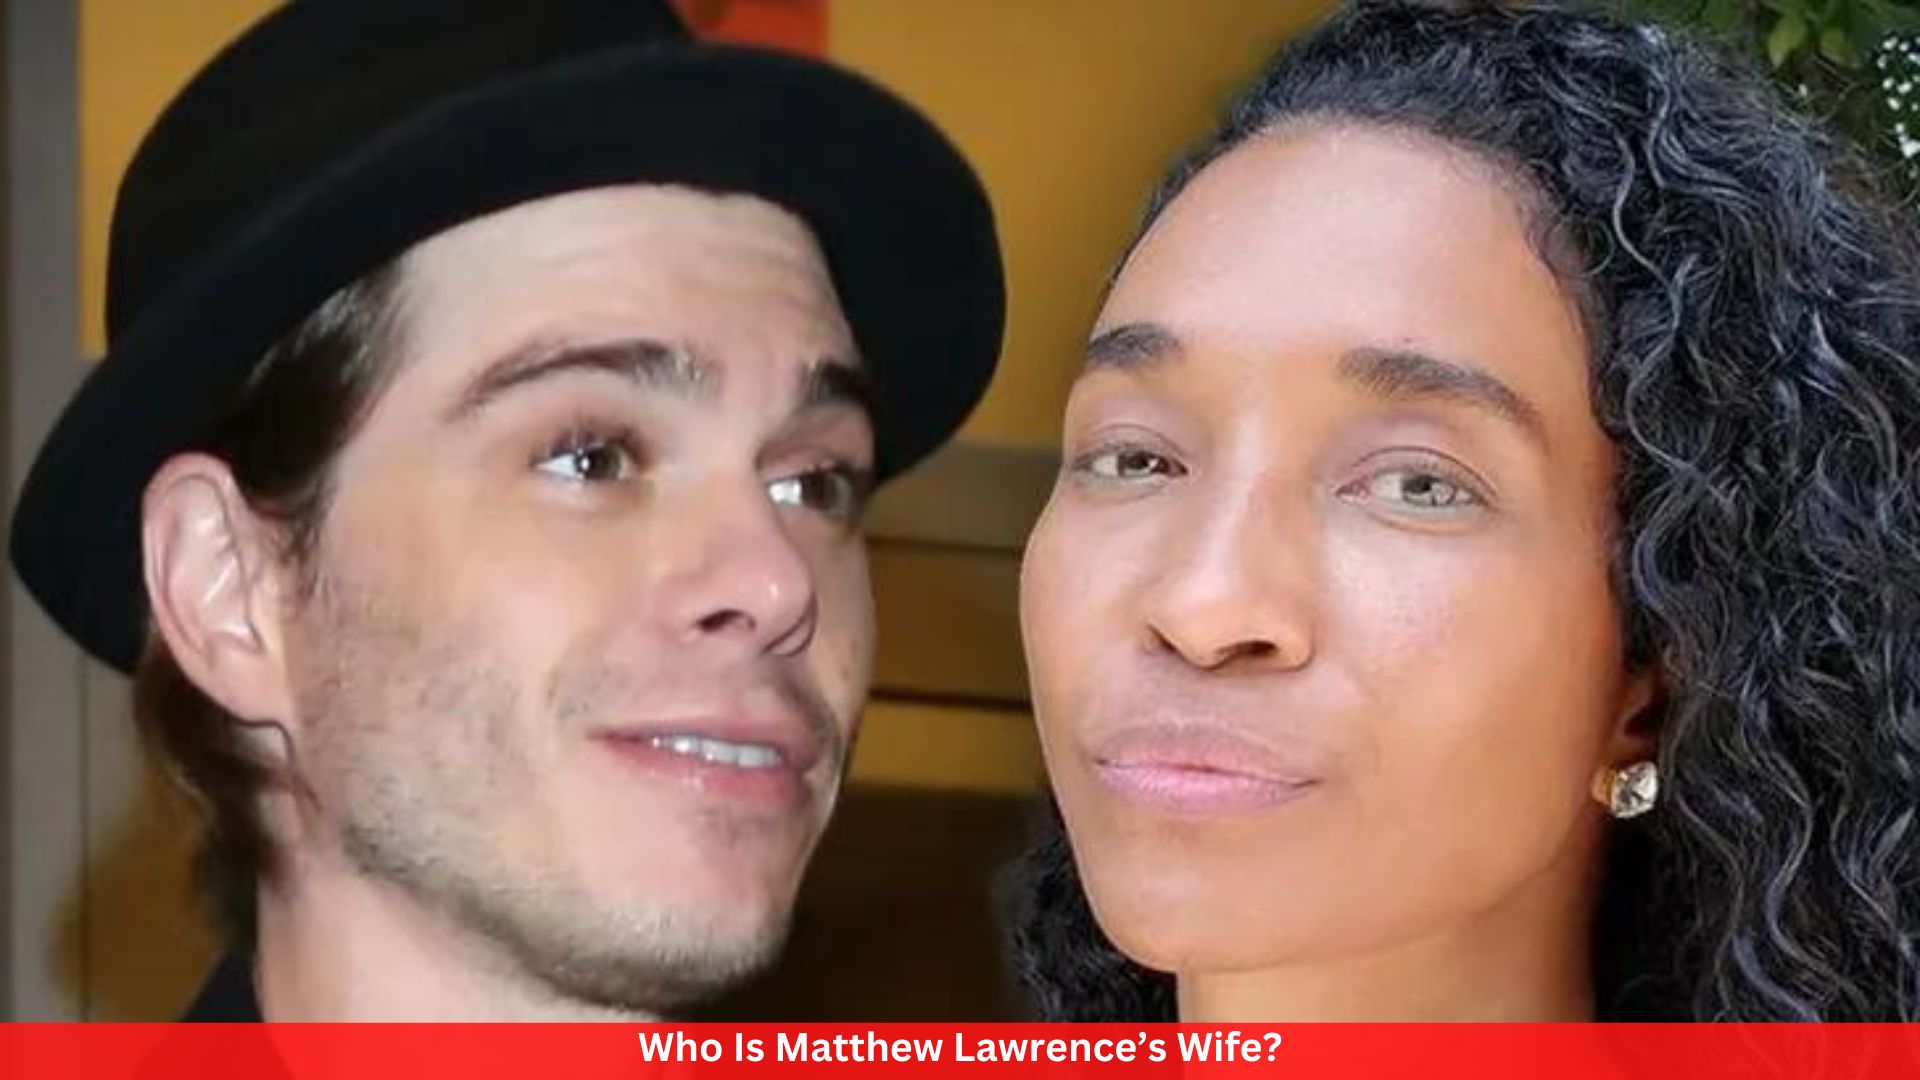 Who Is Matthew Lawrence’s Wife?